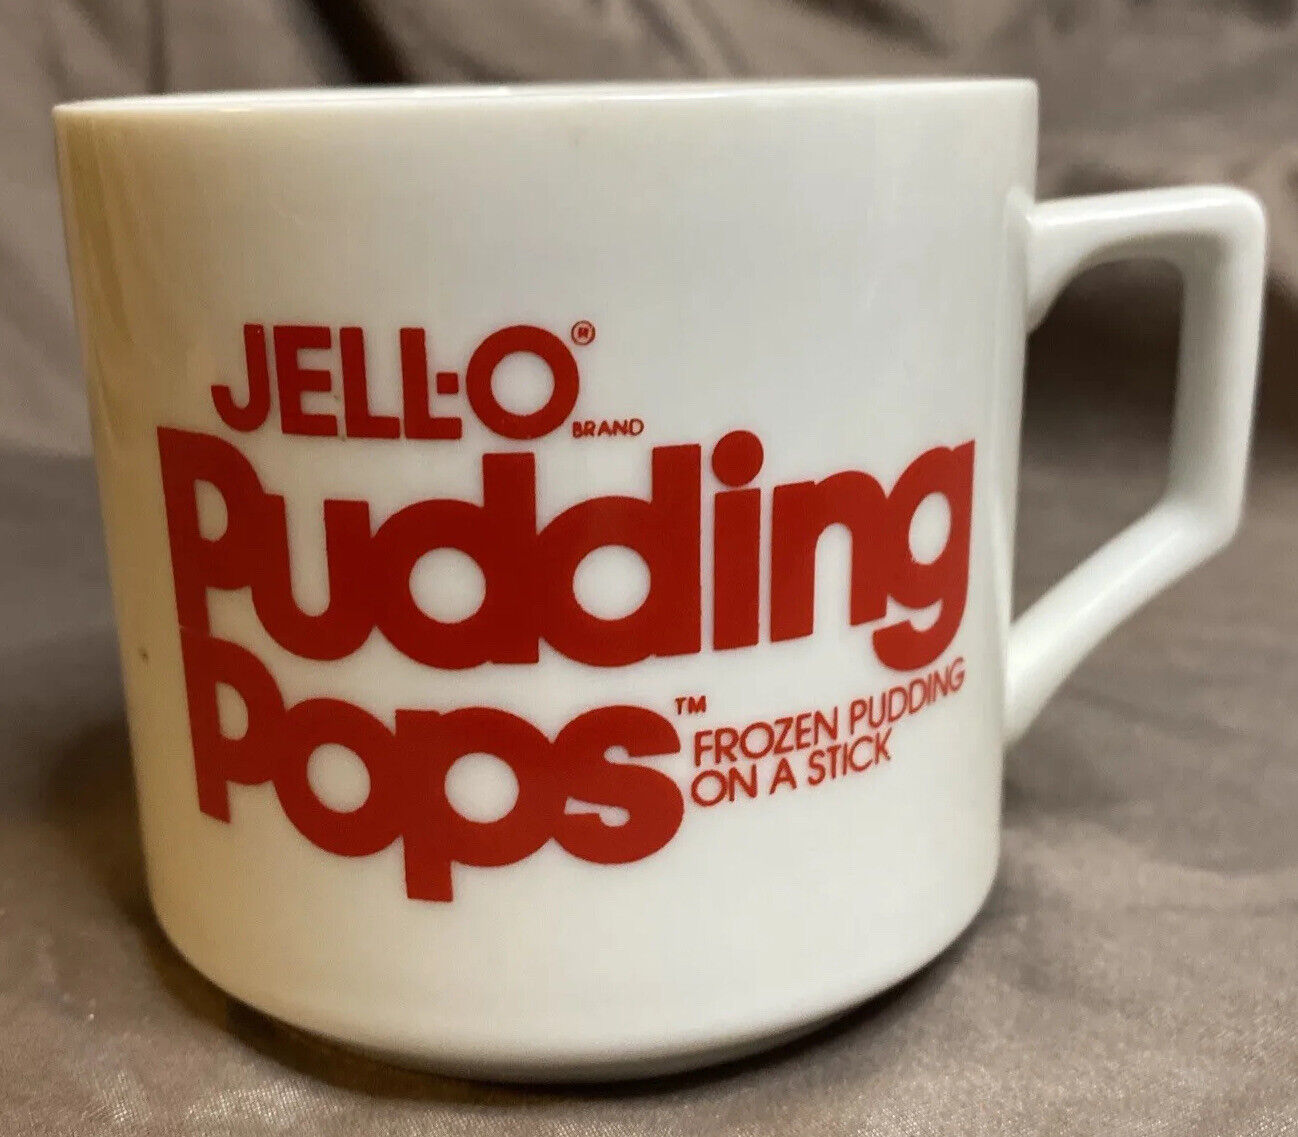 Vintage Jell-o Pudding Pops Coffee Cup Mug Advertising Frozen Pudding Jello